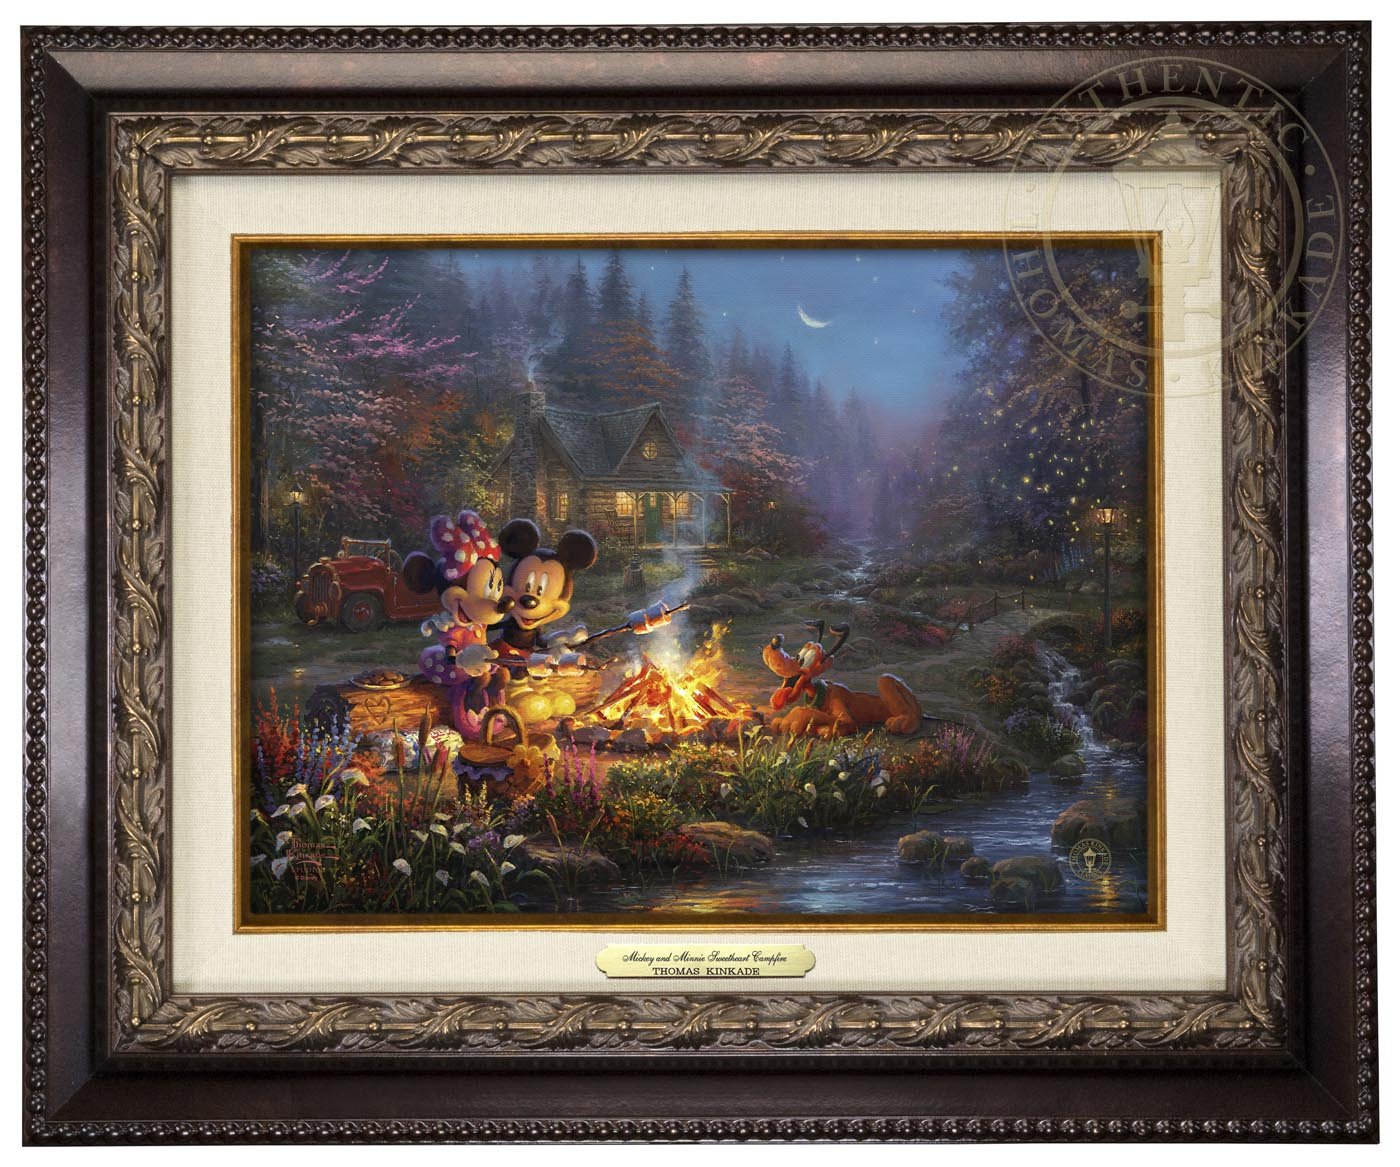 Mickey and Minnie are seen relaxing together on an old log, roasting marshmallows over a crackling campfire after spending a long day of exploring the vast trails of the forest - Aged Bronze Frame